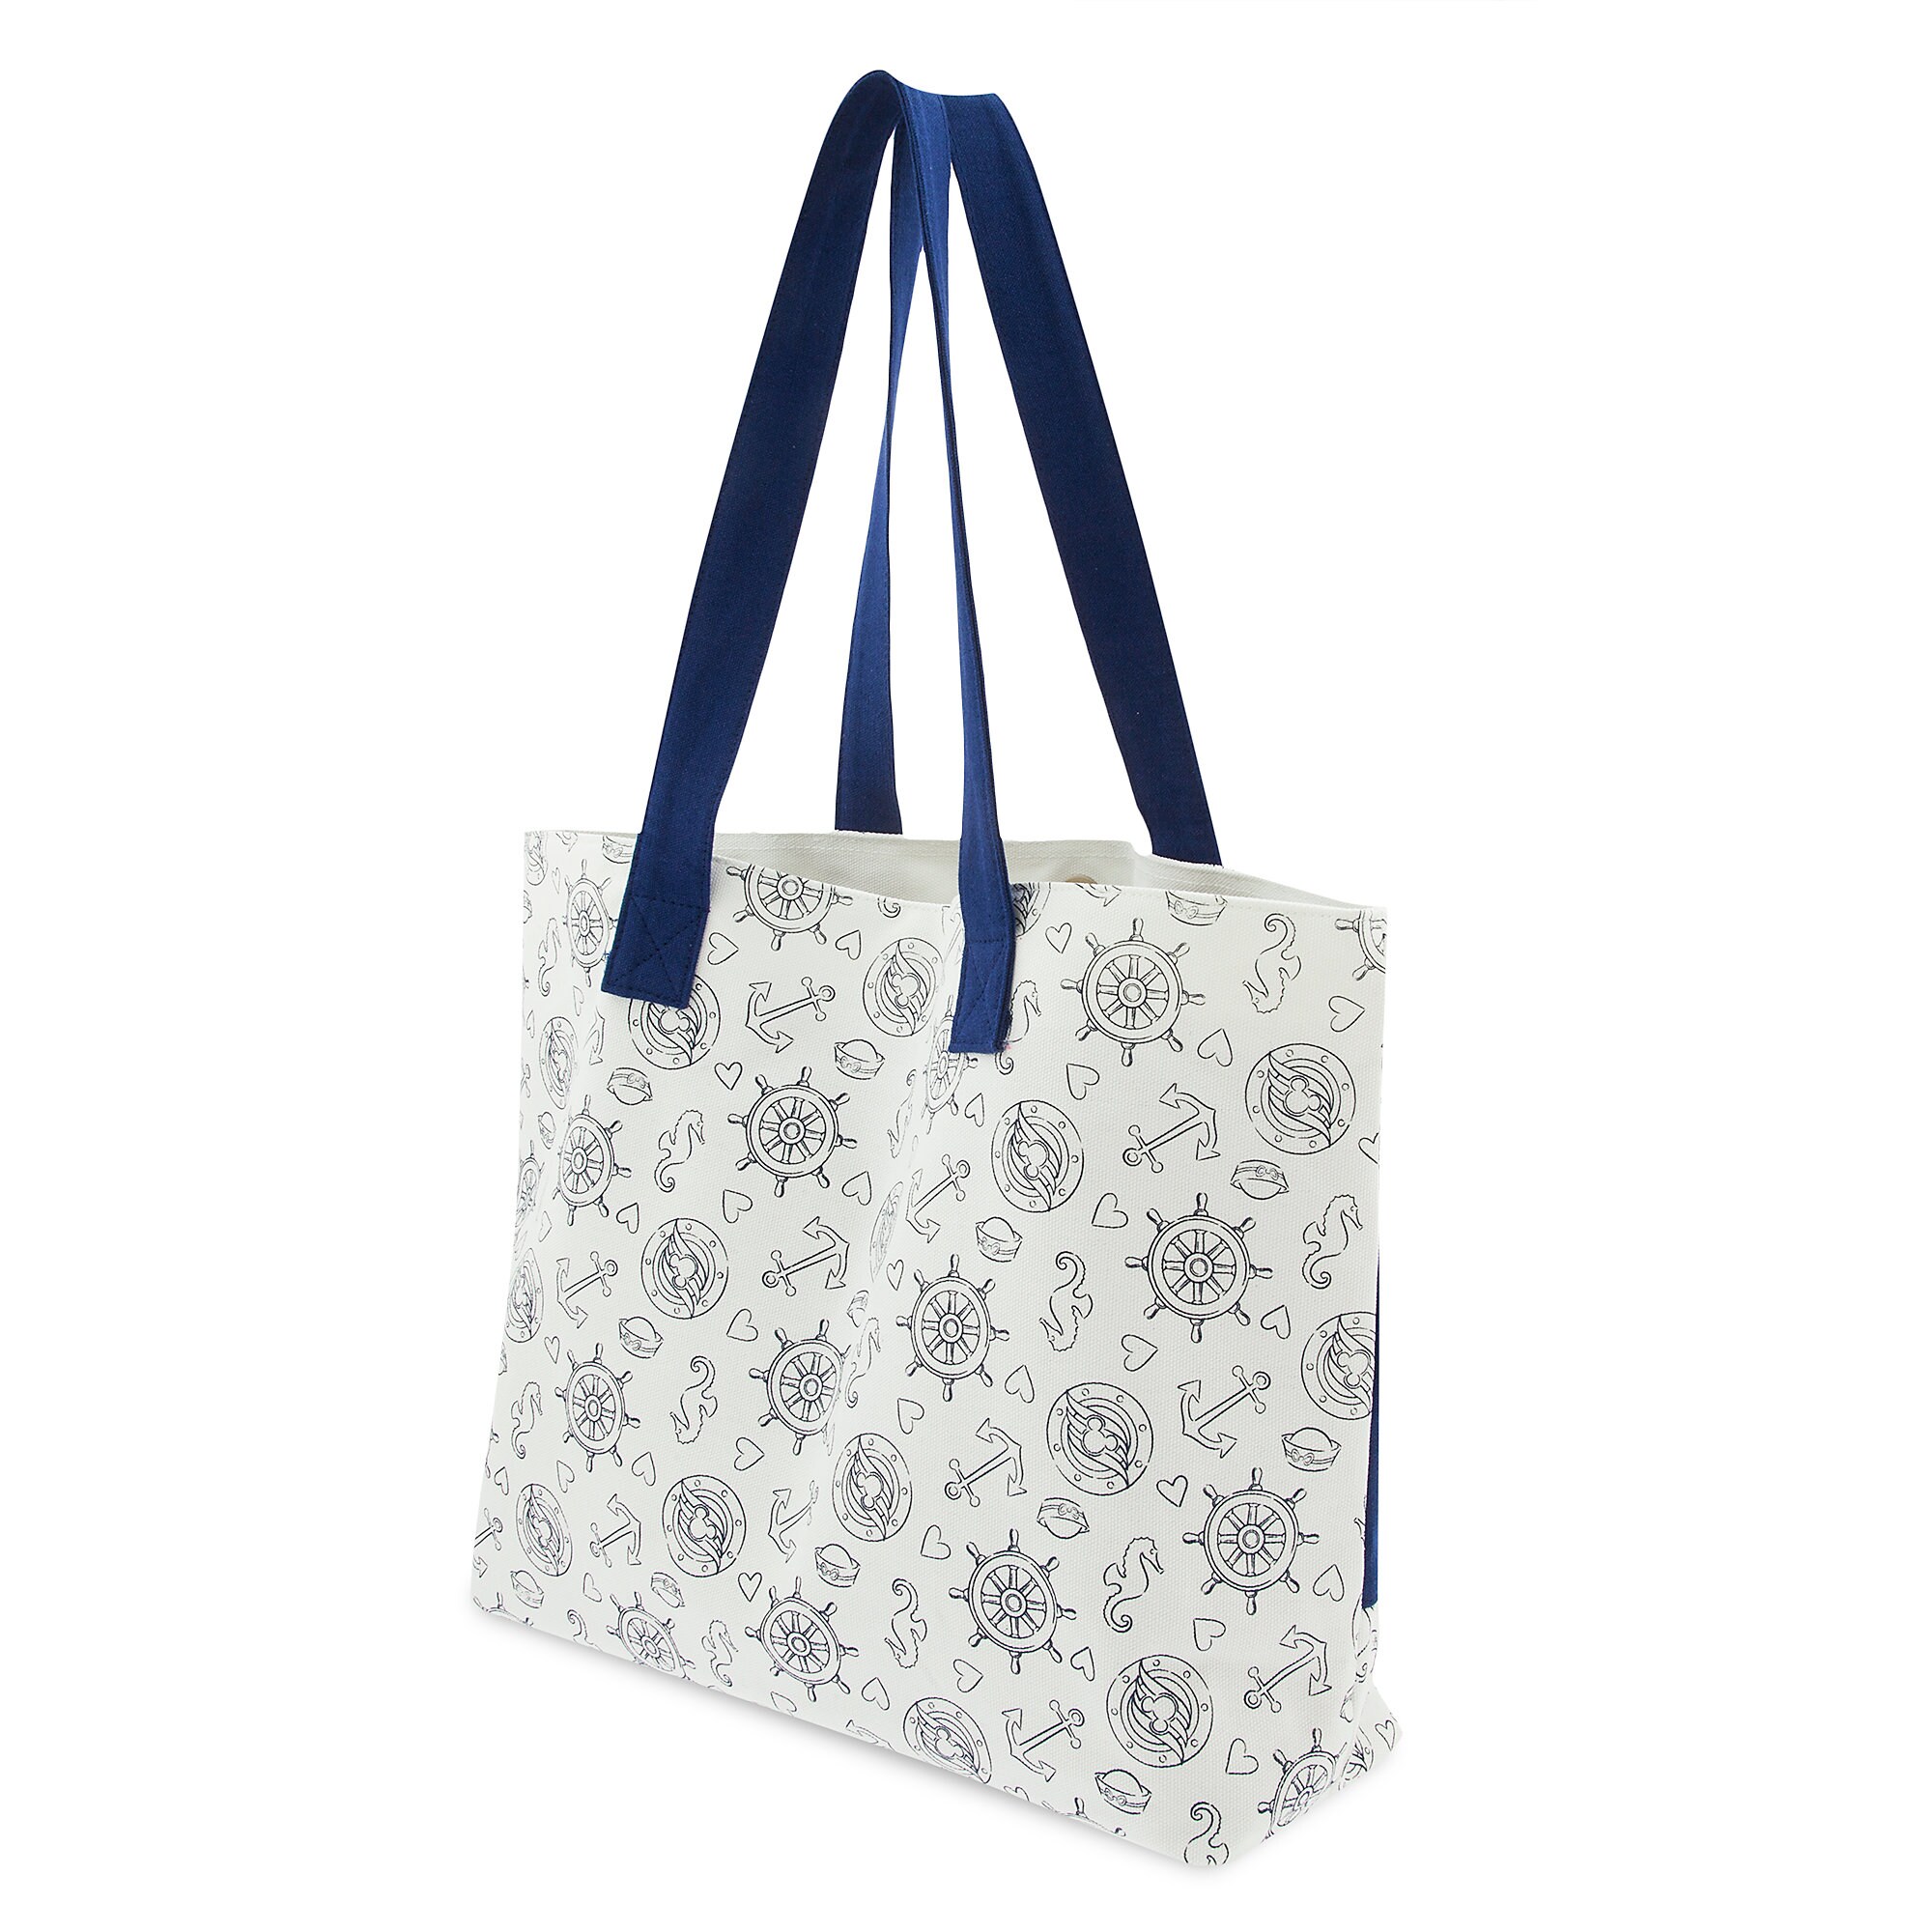 Minnie Mouse Tote Bag - Disney Cruise Line